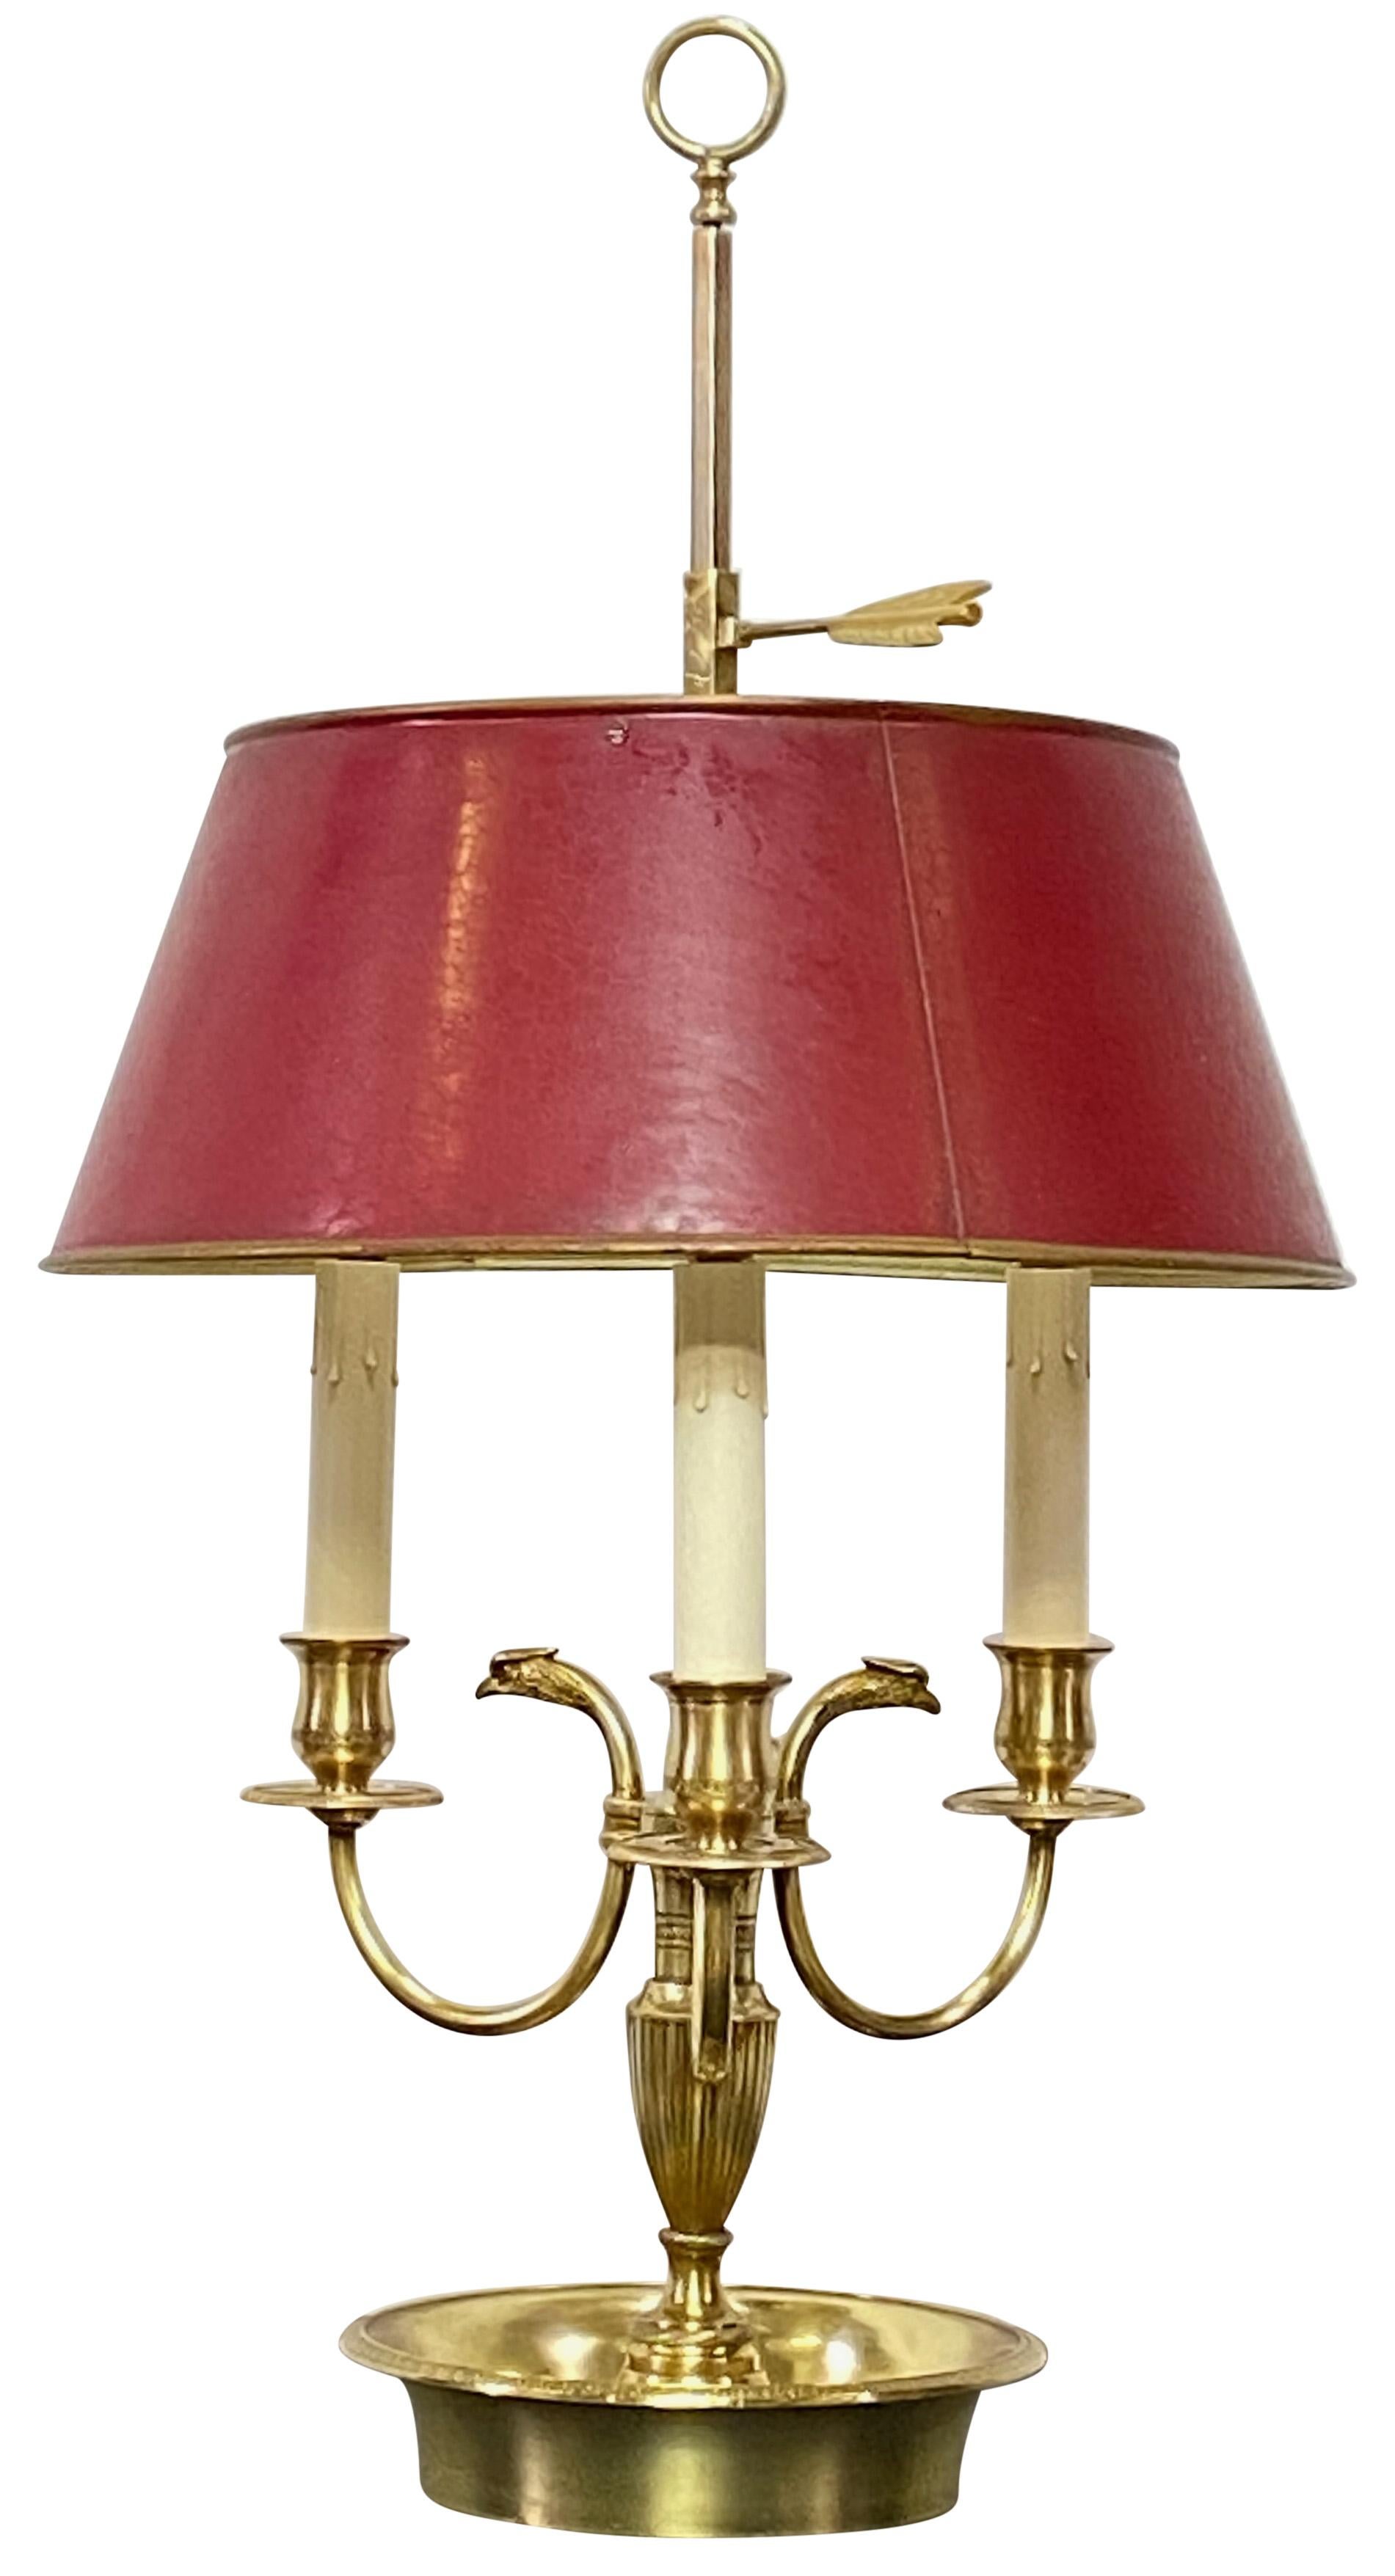 An excellent quality early 19th century French style (produced in the early 20th century) brass bouillotte table lamp with original red tole painted shade.
Recently reconditioned and re-wired in excellent condition.
We can change the white candle